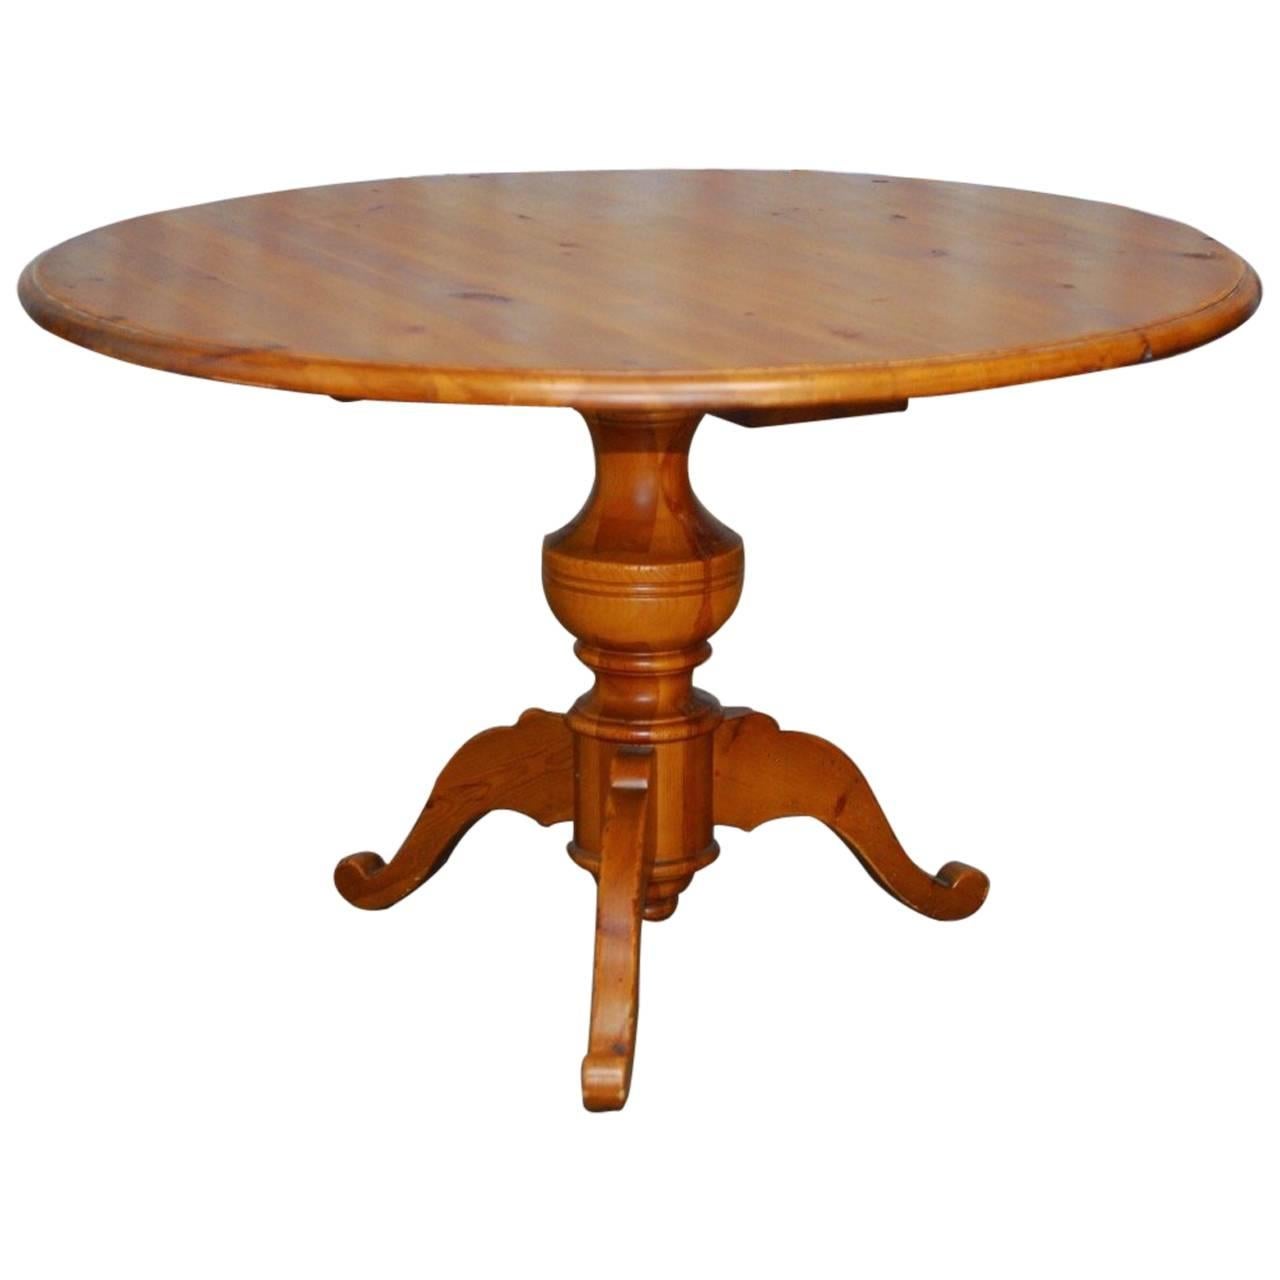 English Country Round Pine Pedestal Dining Table